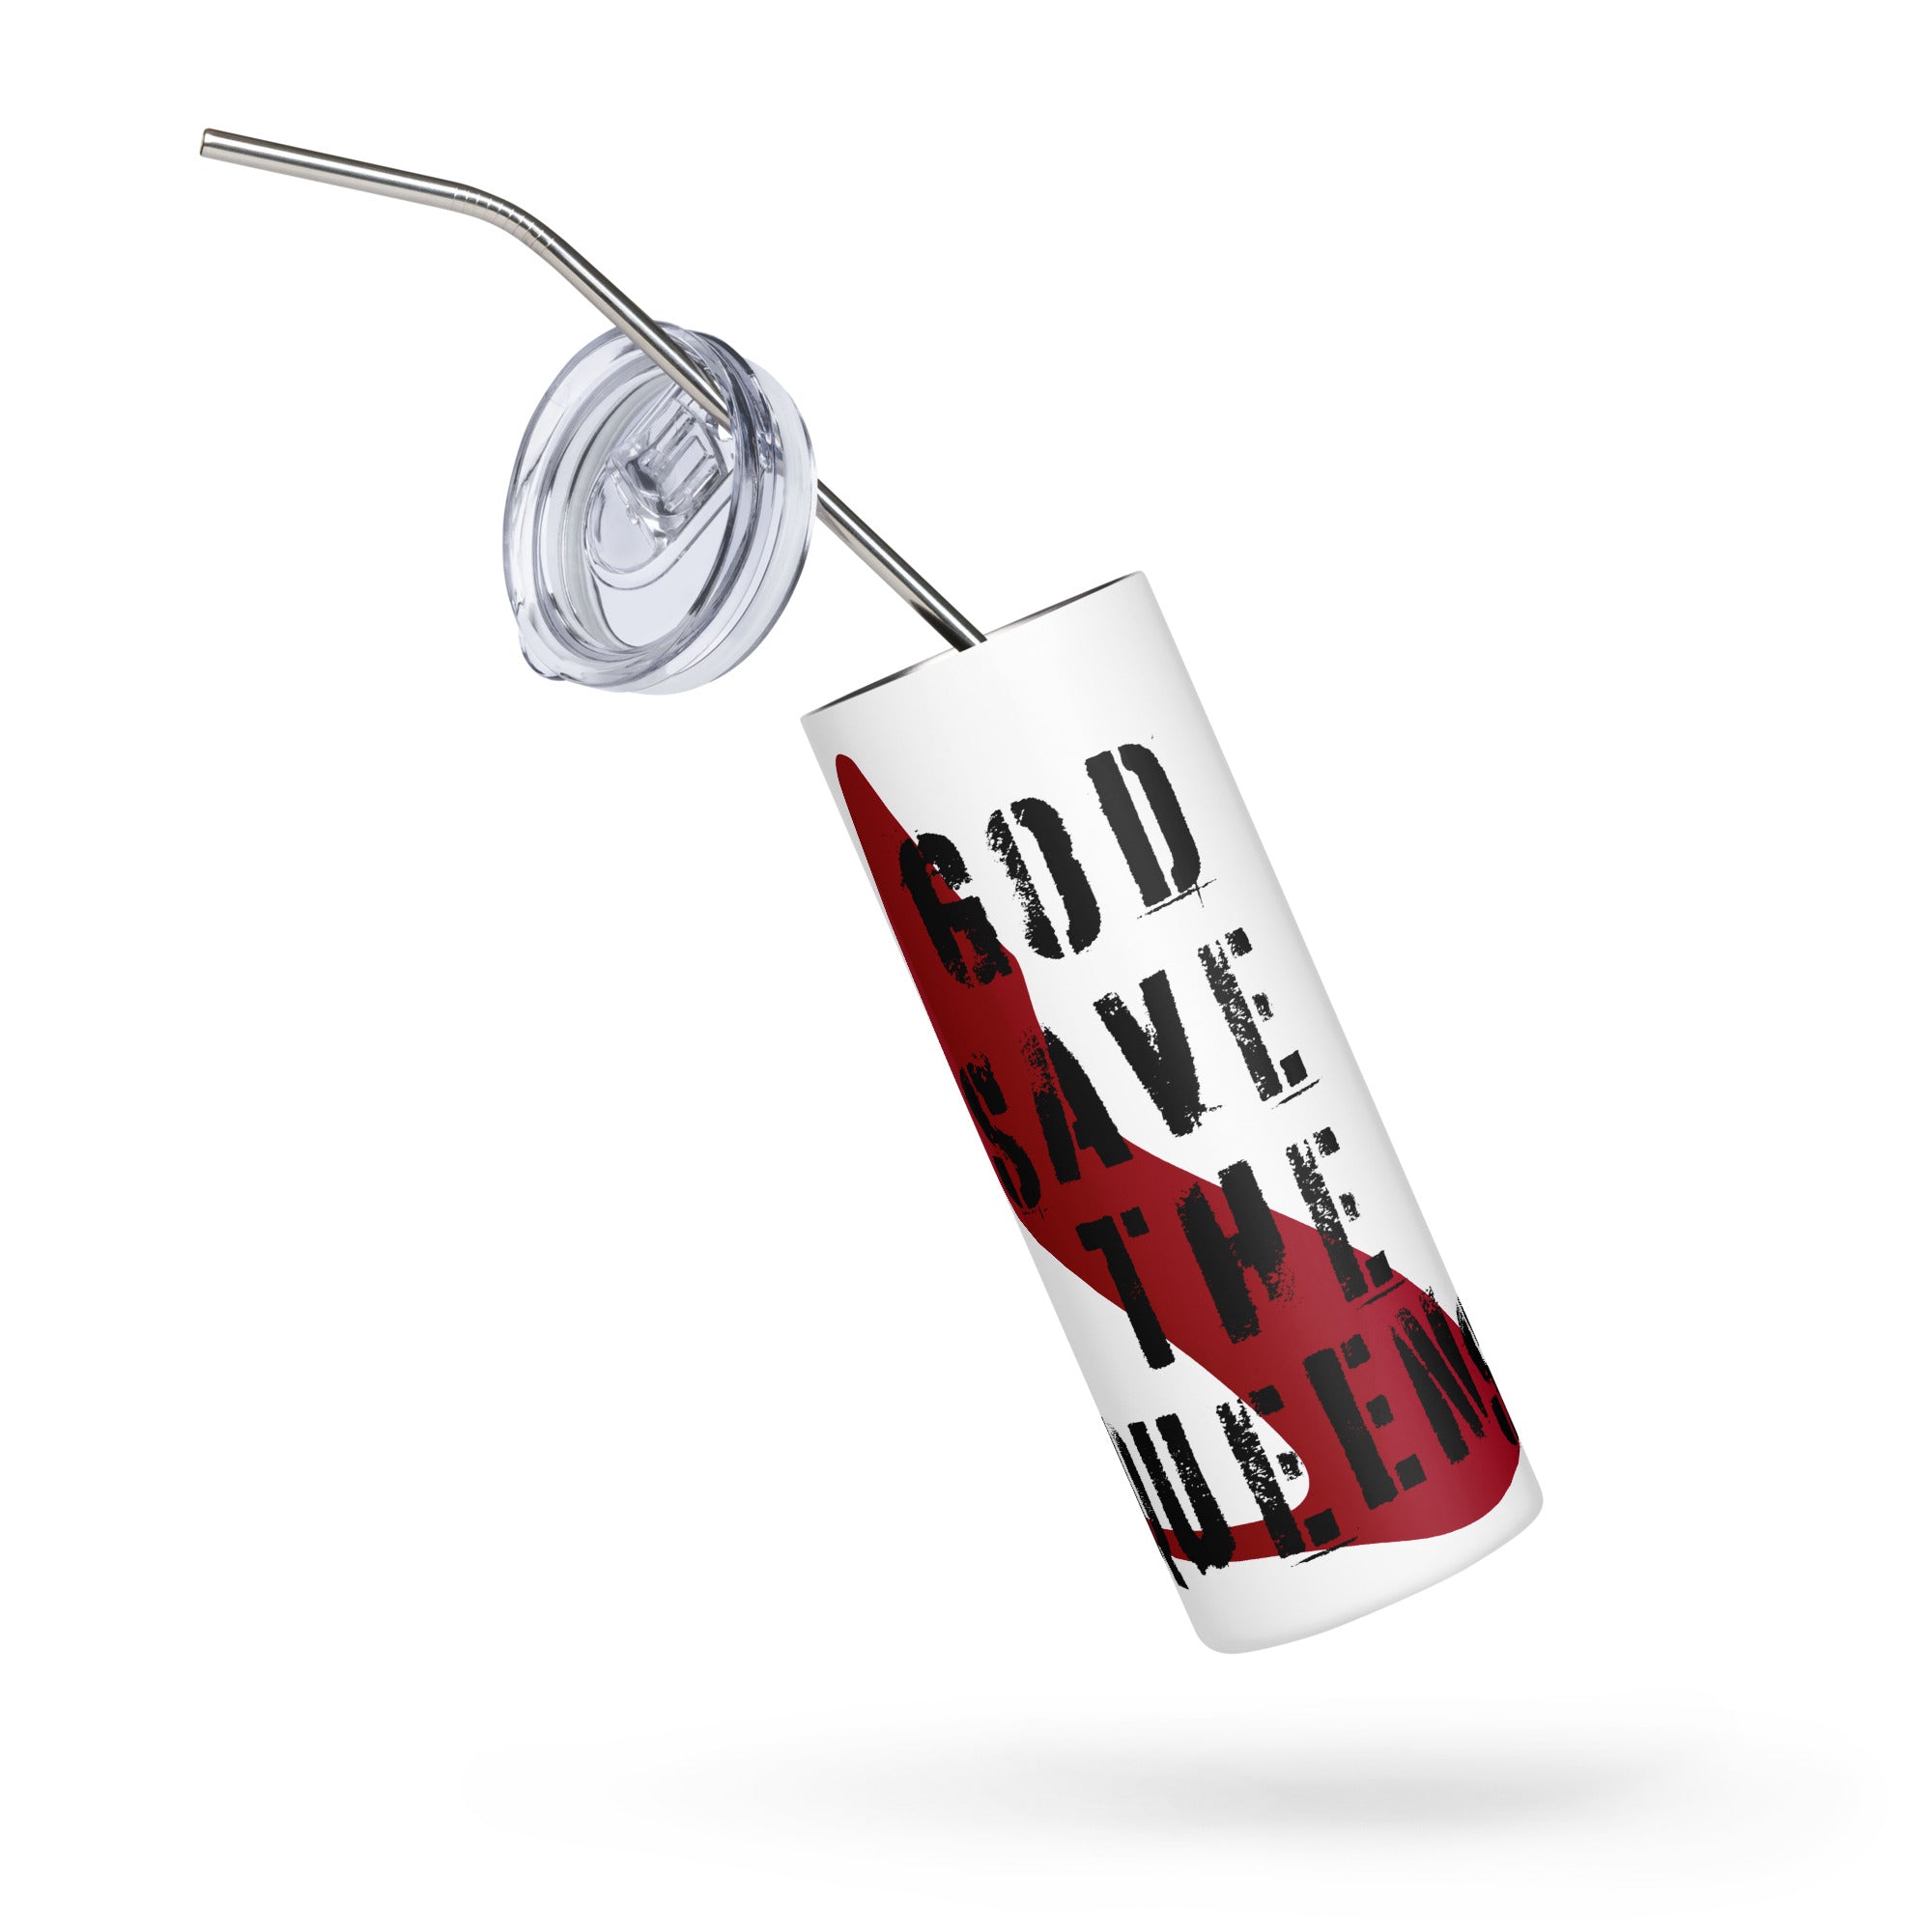 God Save the Queens Royal tumbler - Stainless steel